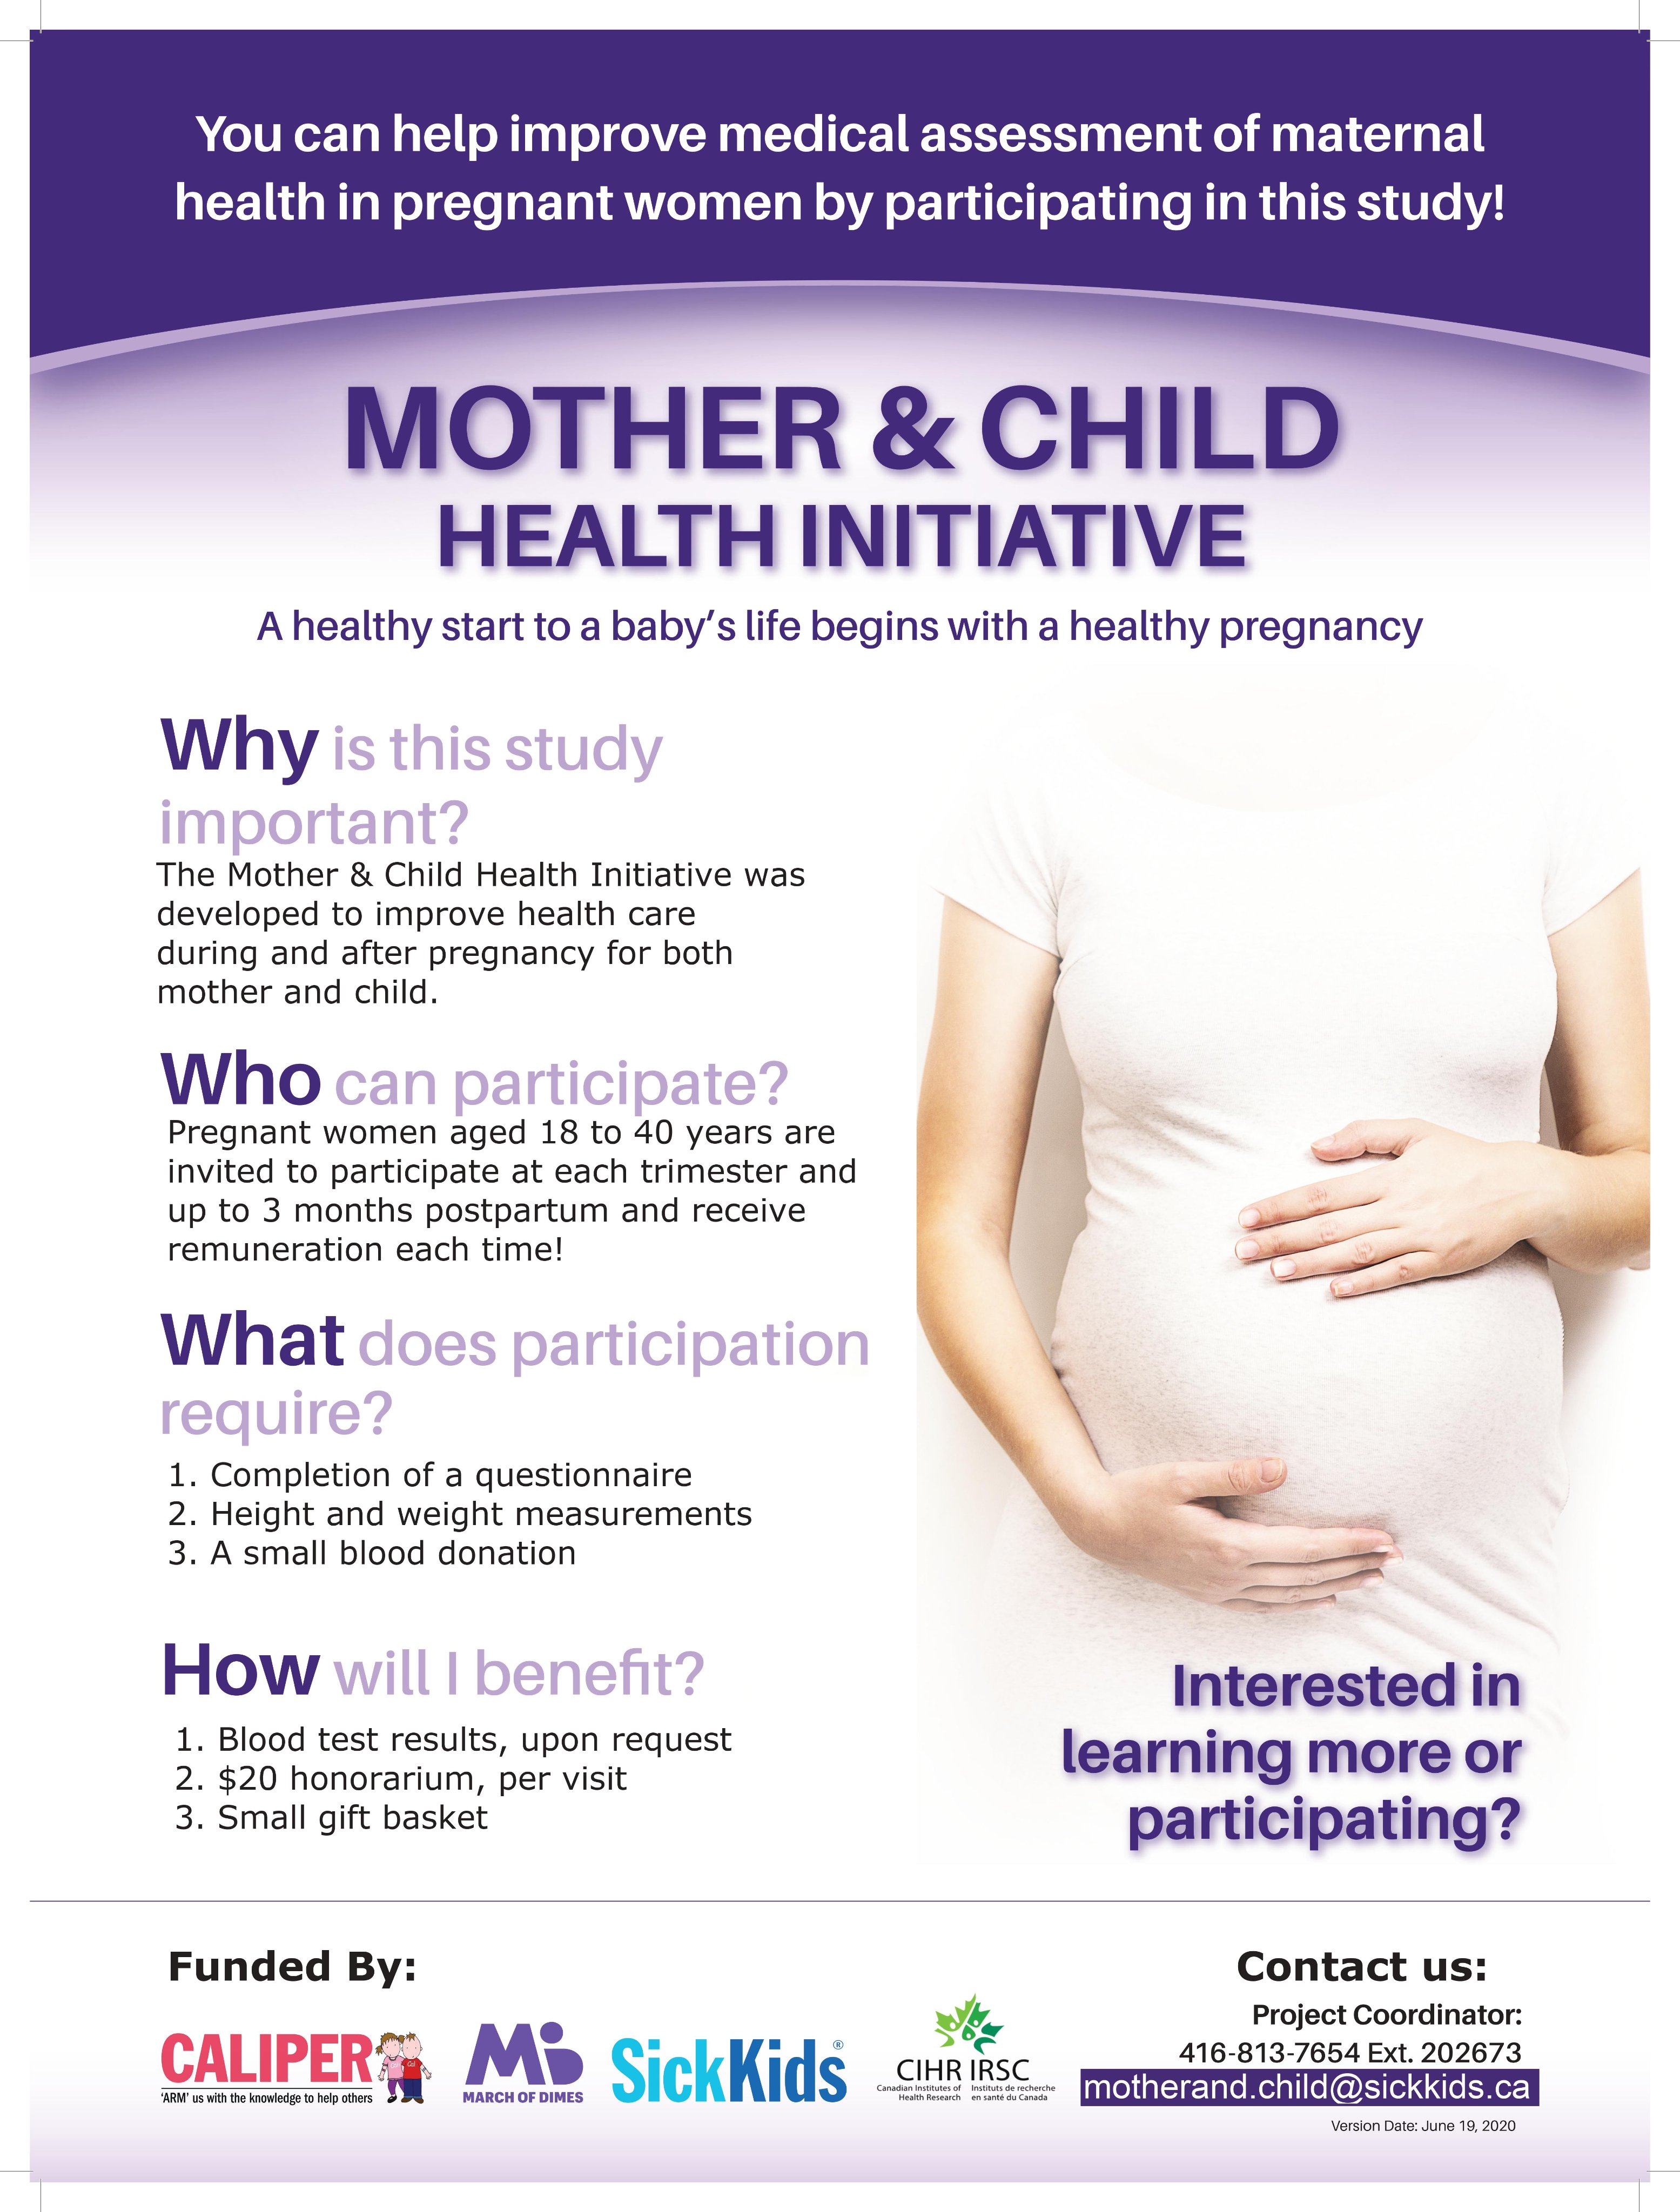 The Hospital for Sick Children (SickKids) on X: Are you a healthy,  pregnant woman aged 18-40? Participate in an #SKResearch study aimed to  improve health care during and after pregnancy for both